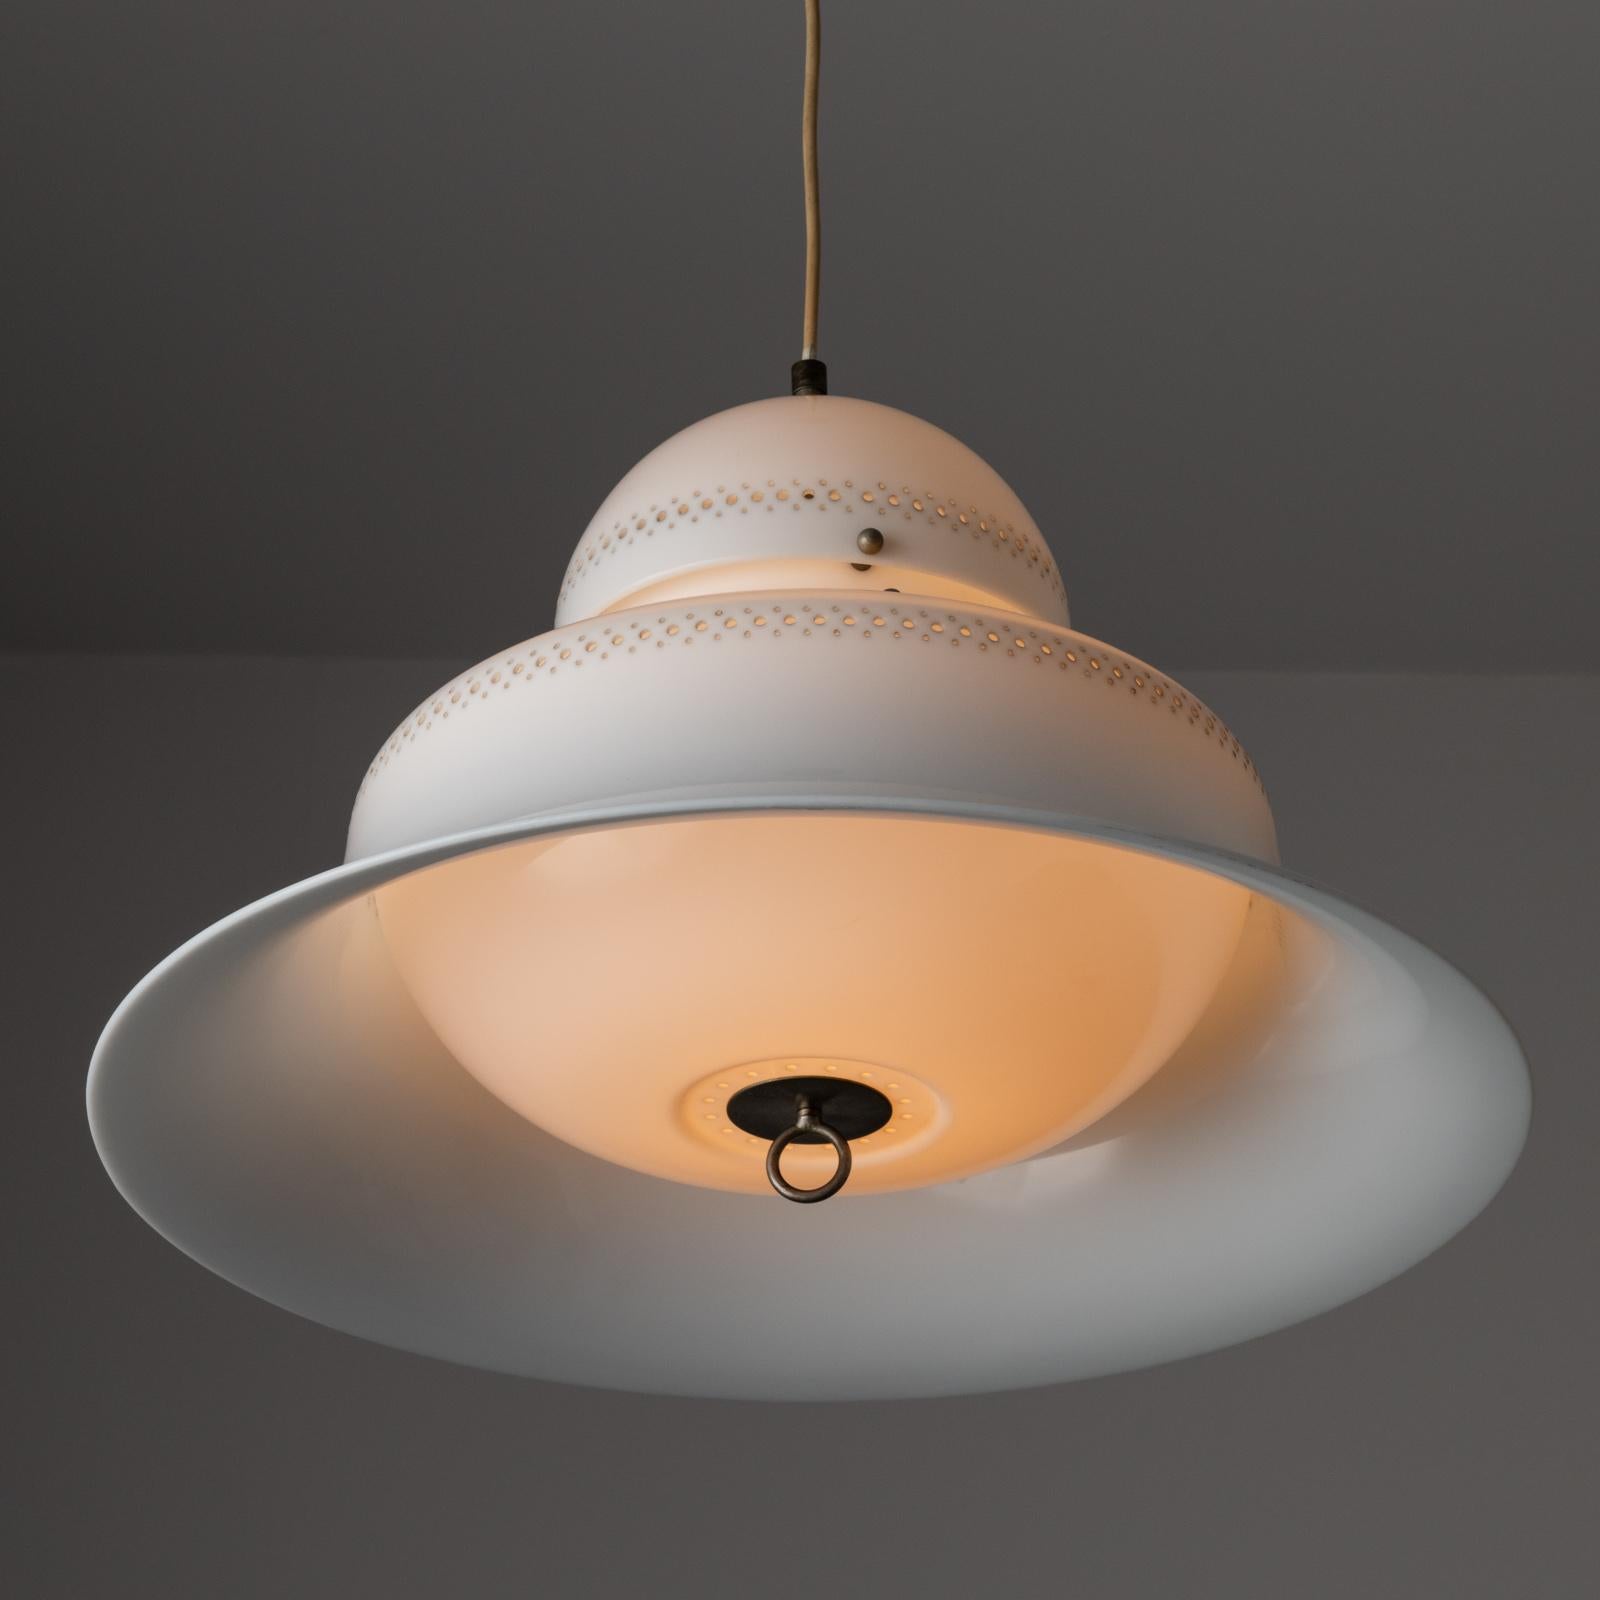 Model KD14 Ceiling Light by Sergio Asti for Kartell. Designed and manufactured in Italy, circa 1963. Acrylic suspension lamp with subtle brass detailing, and banding perforations along a curved, tulip-like shade. The lamp holds one E27 bulb socket,